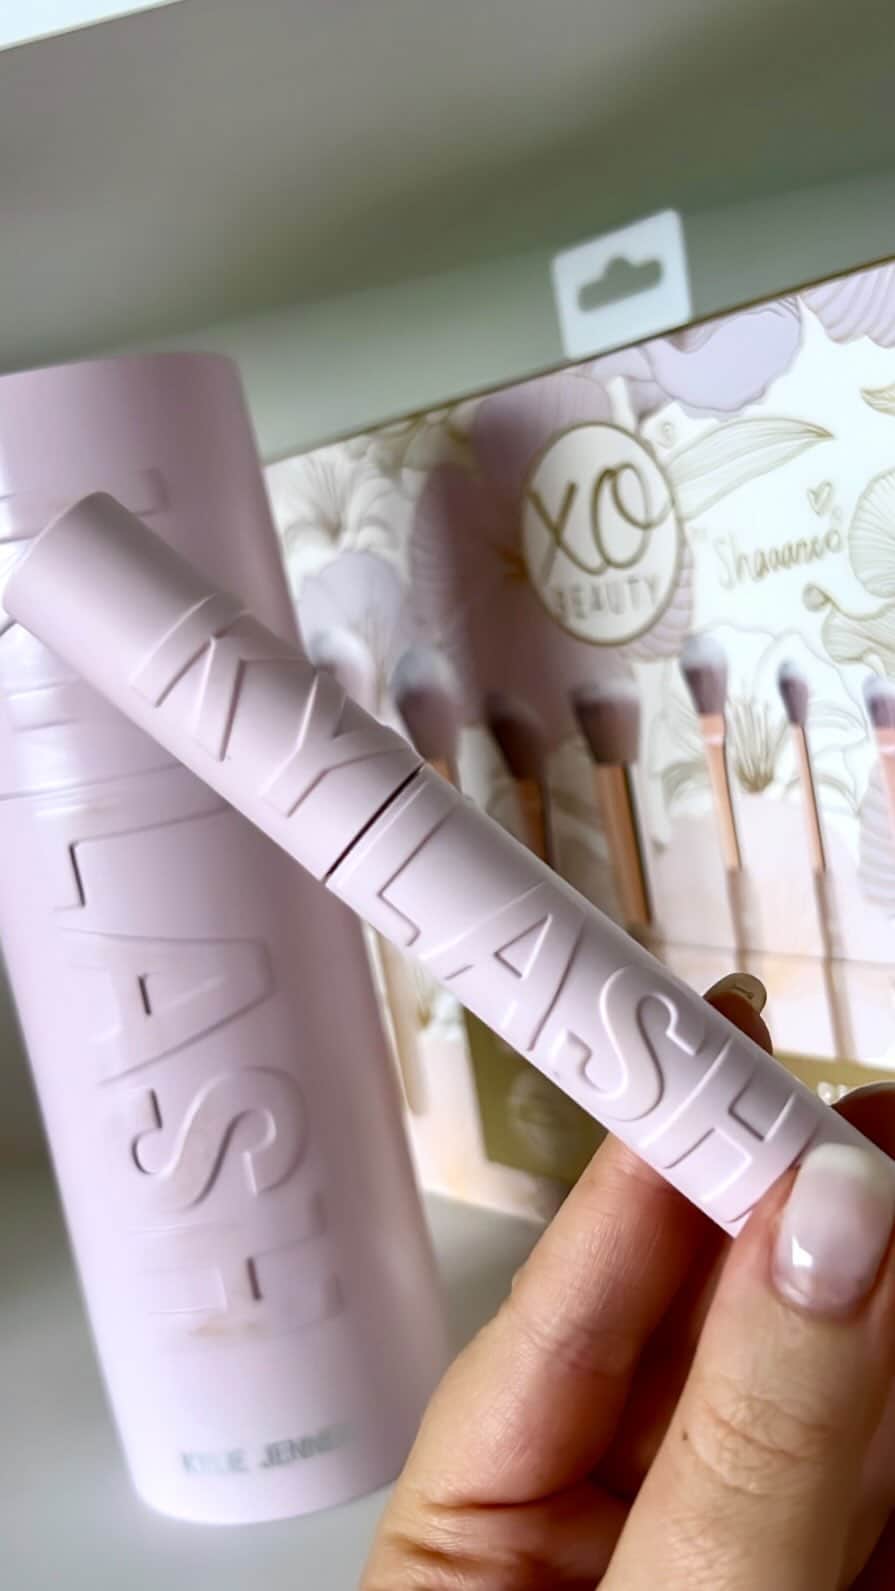 Shannonのインスタグラム：「Trying the new @kyliecosmetics mascara! 🤍 (ad gifted) ☁️ I was actually surprised at how this made my lashes look… as far as mascaras go I feel like there are so many similar ones, but this one seemed to multiply my actual lash hairs which is new haha 💗 I just hope it doesn’t dry out quickly since it already is a drier consistency 🥰 kinda reminds me of the dior one that I love」